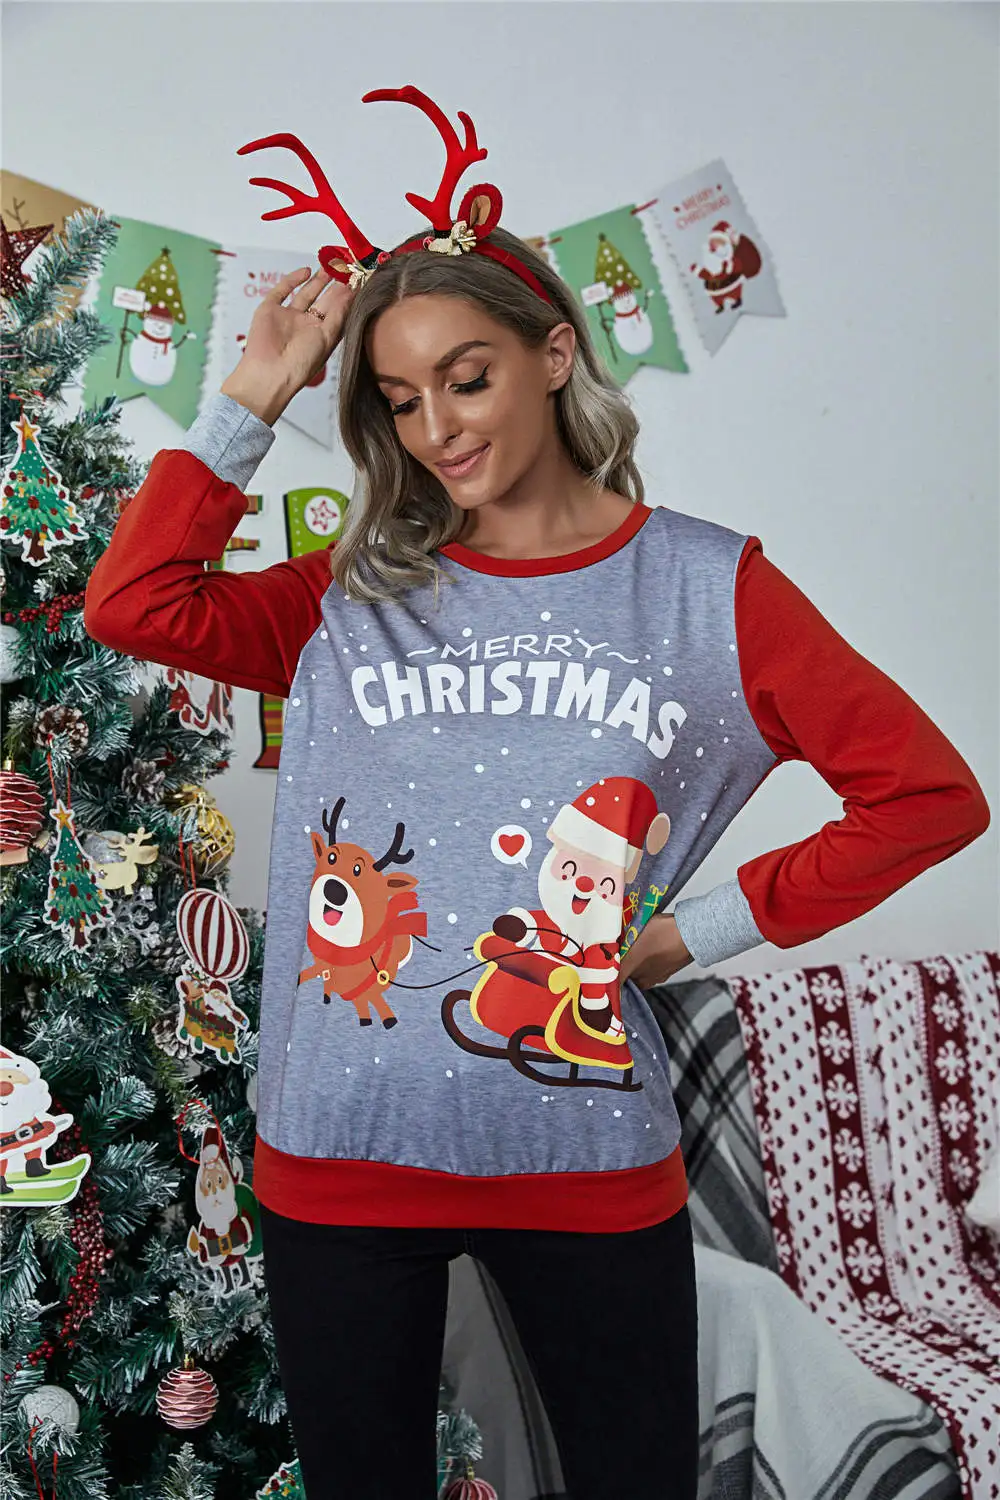 Women's Snowman Print Christmas Top Casual Colorblock Tunic Blouse Shirts Xmas Holiday Round Neck Pullover Sweatshirt 